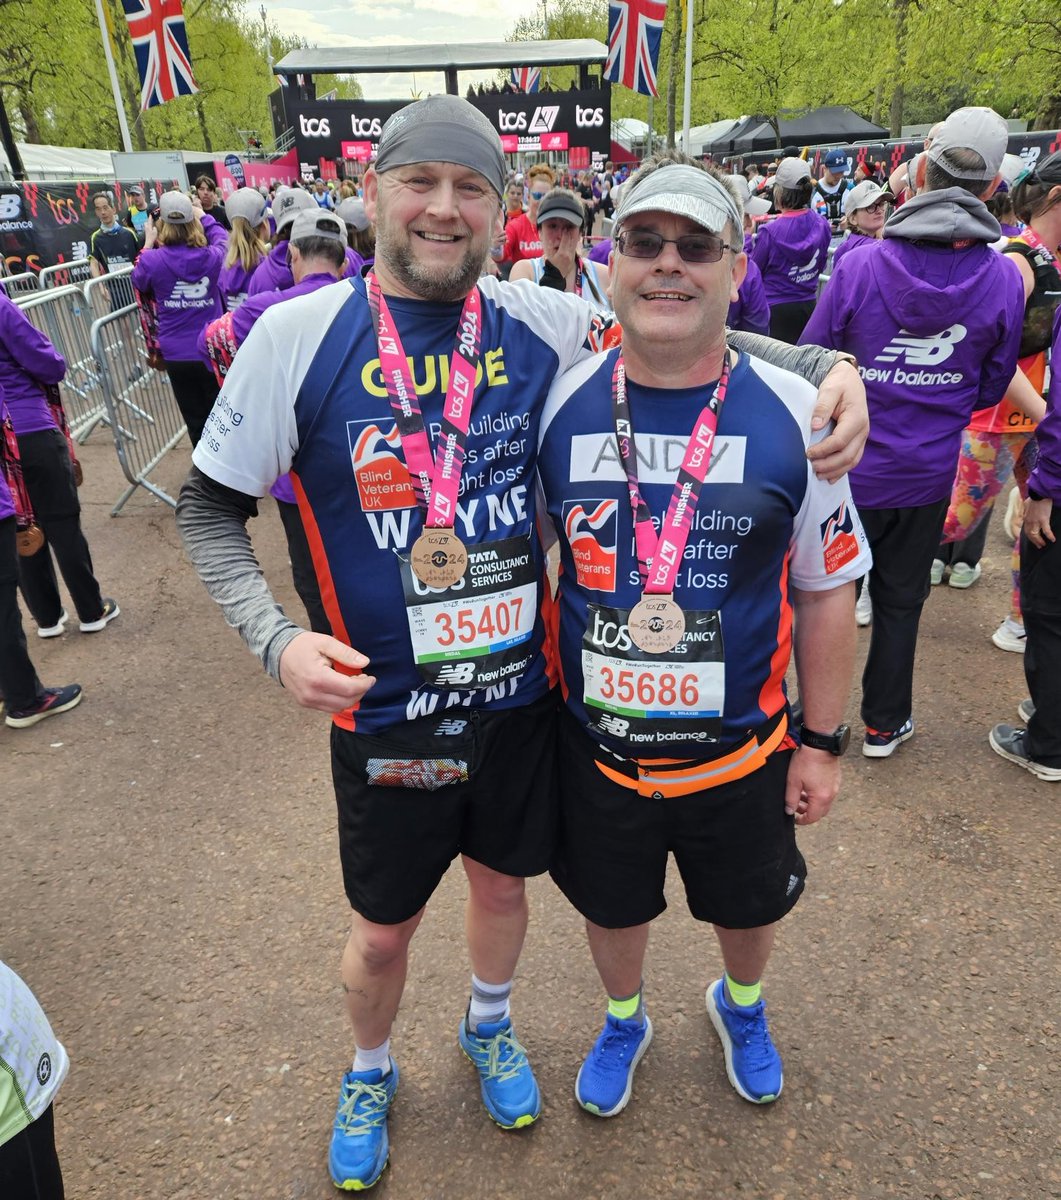 Blind veteran Andy ran the #LondonMarathon with guided support from his friend, Wayne. Their teamwork shows that people with sight loss can confidently run marathons when the right support systems are in place. Up next? London to Brighton Cycle! Read more: ow.ly/HFXL50RqxJo